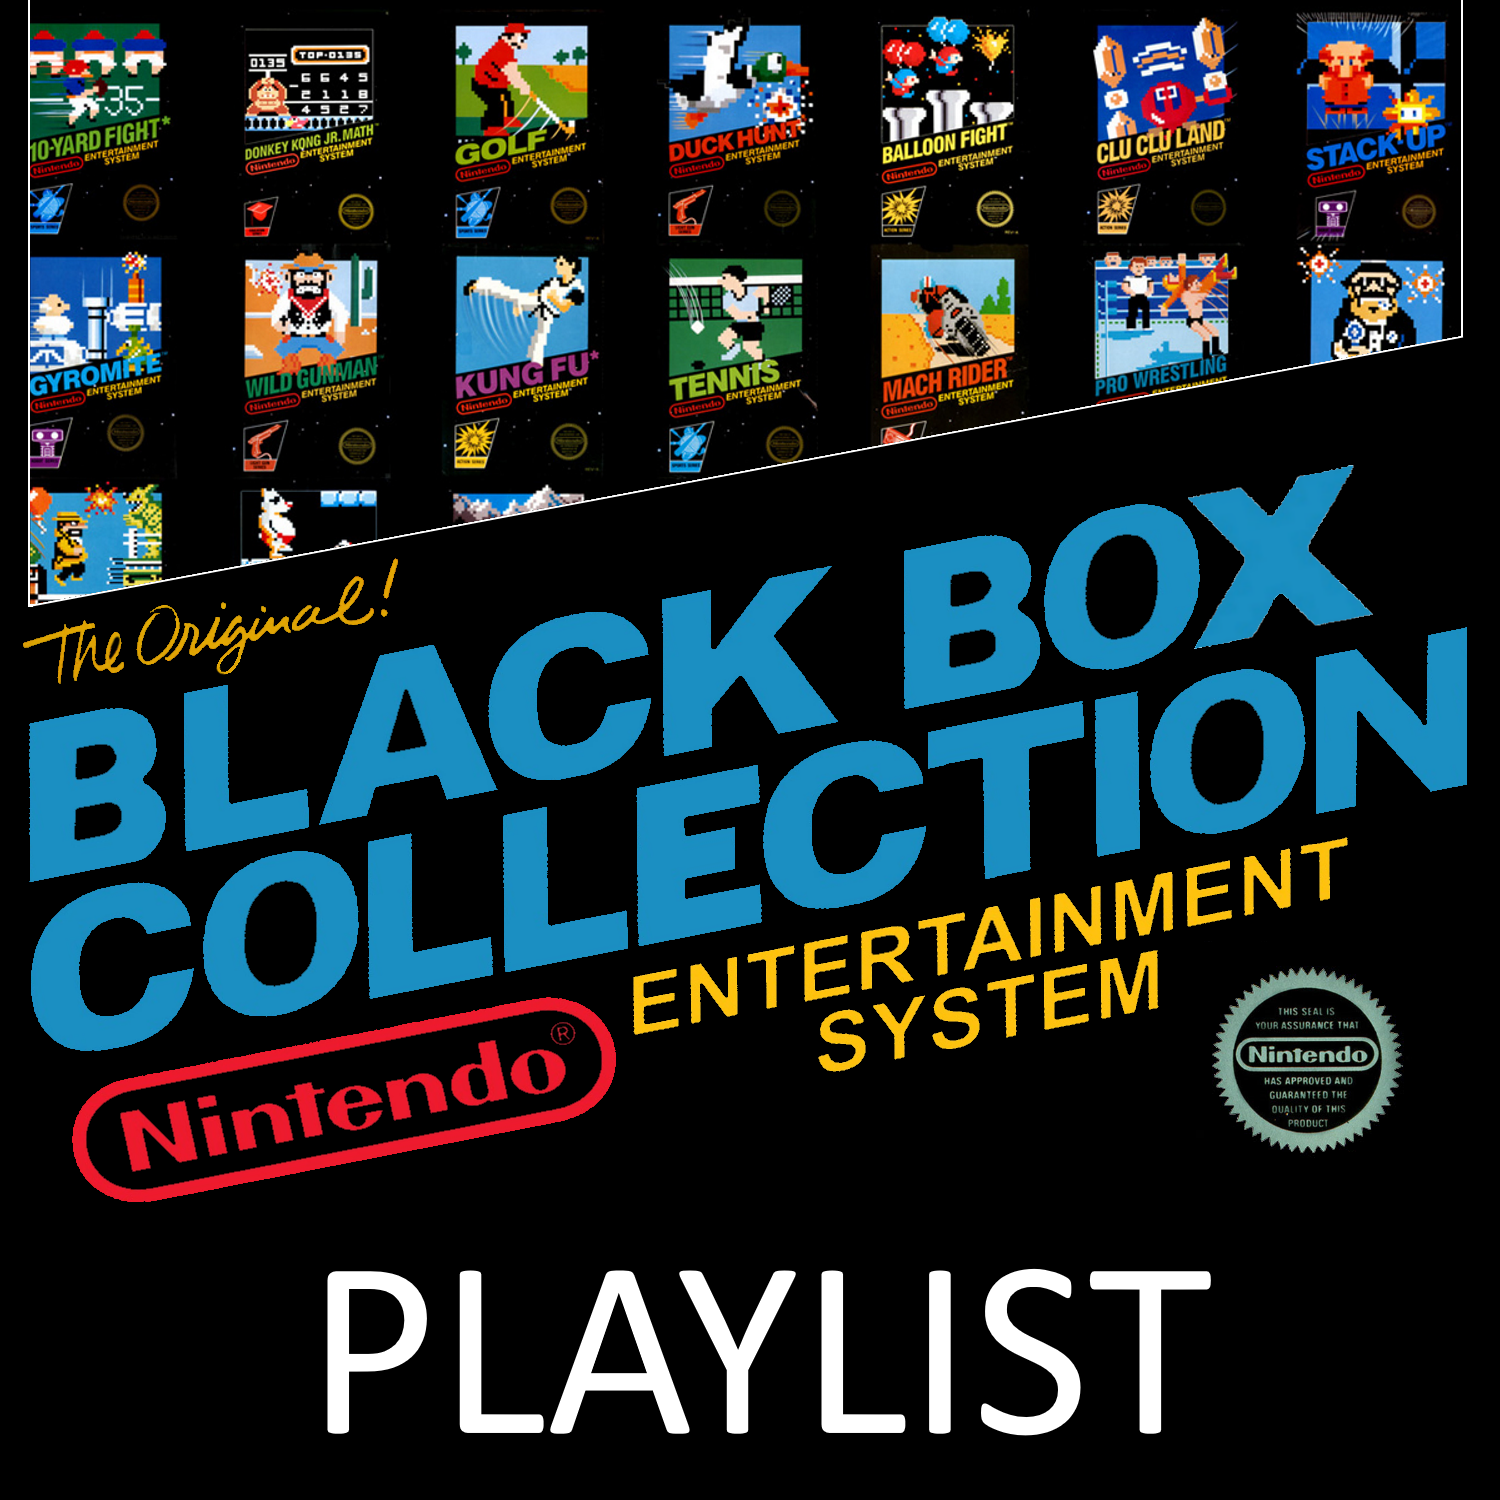 More information about "NES Black Box Collection Playlist"